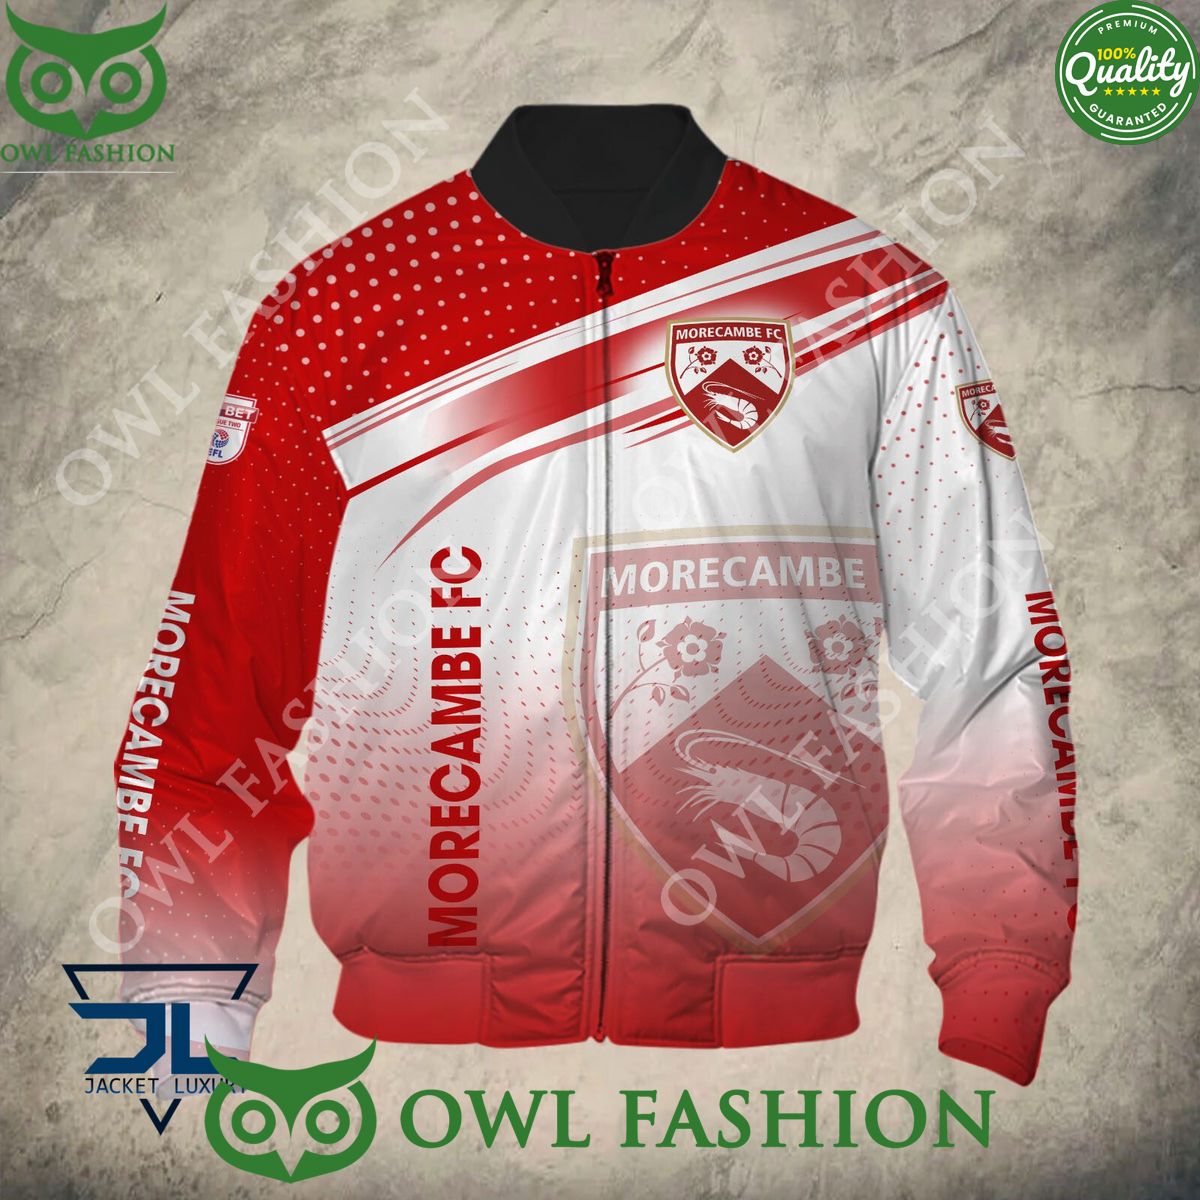 Morecambe F.C Trending Design League Two Hoodie Shirt Wow! This is gracious